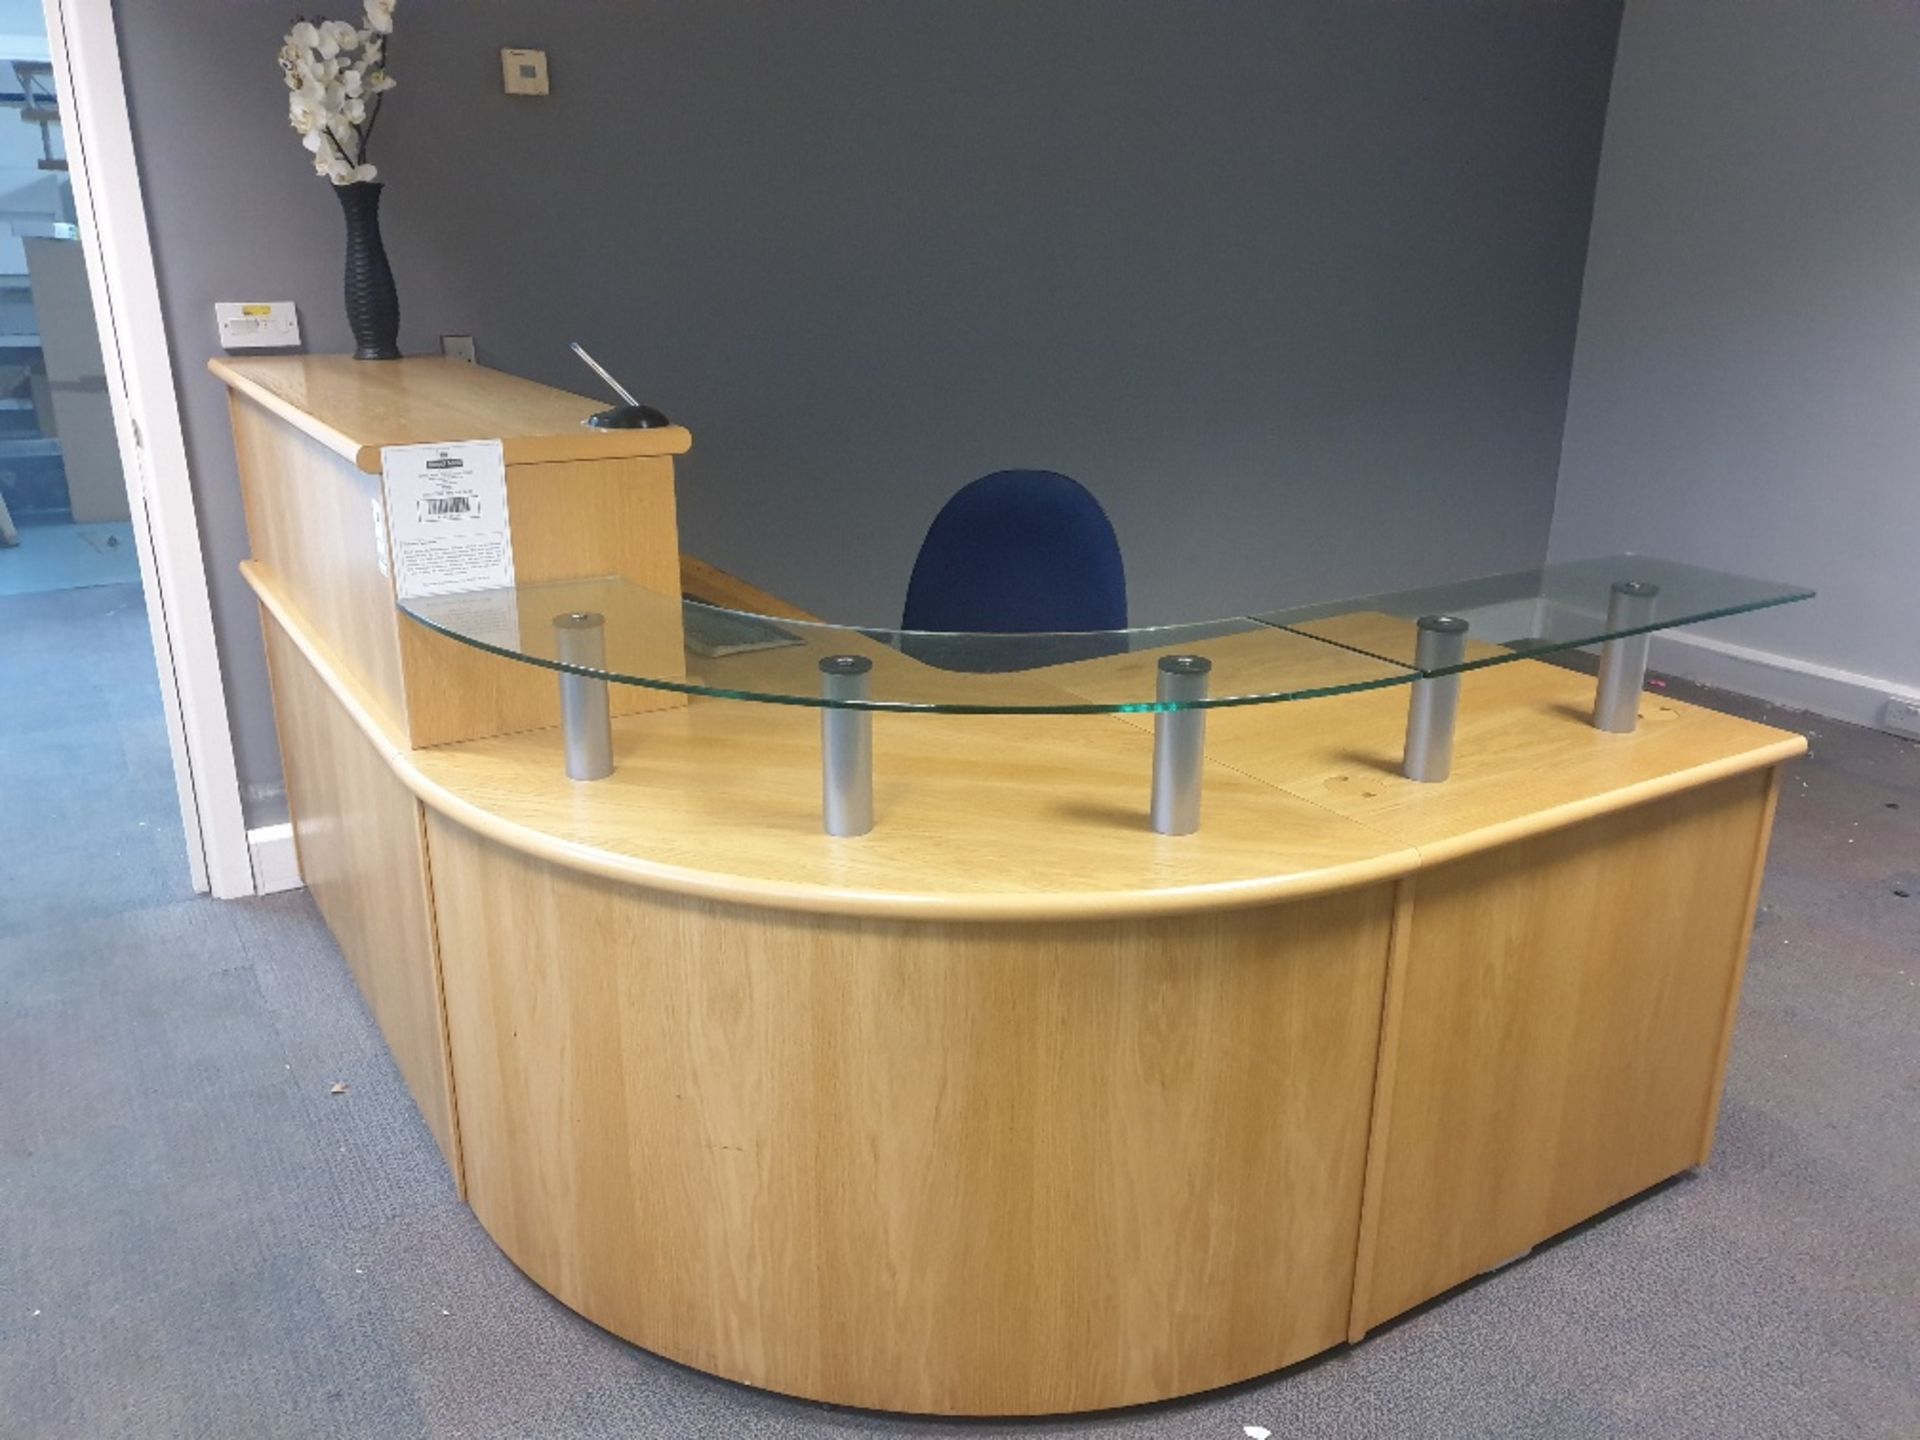 CURVED WOODEN RECEPTION DESK WITH GLASS SHELF AND 3 X 2 DRAWER PEDASTALS, DARK BLUE OFFICE CHAIR,